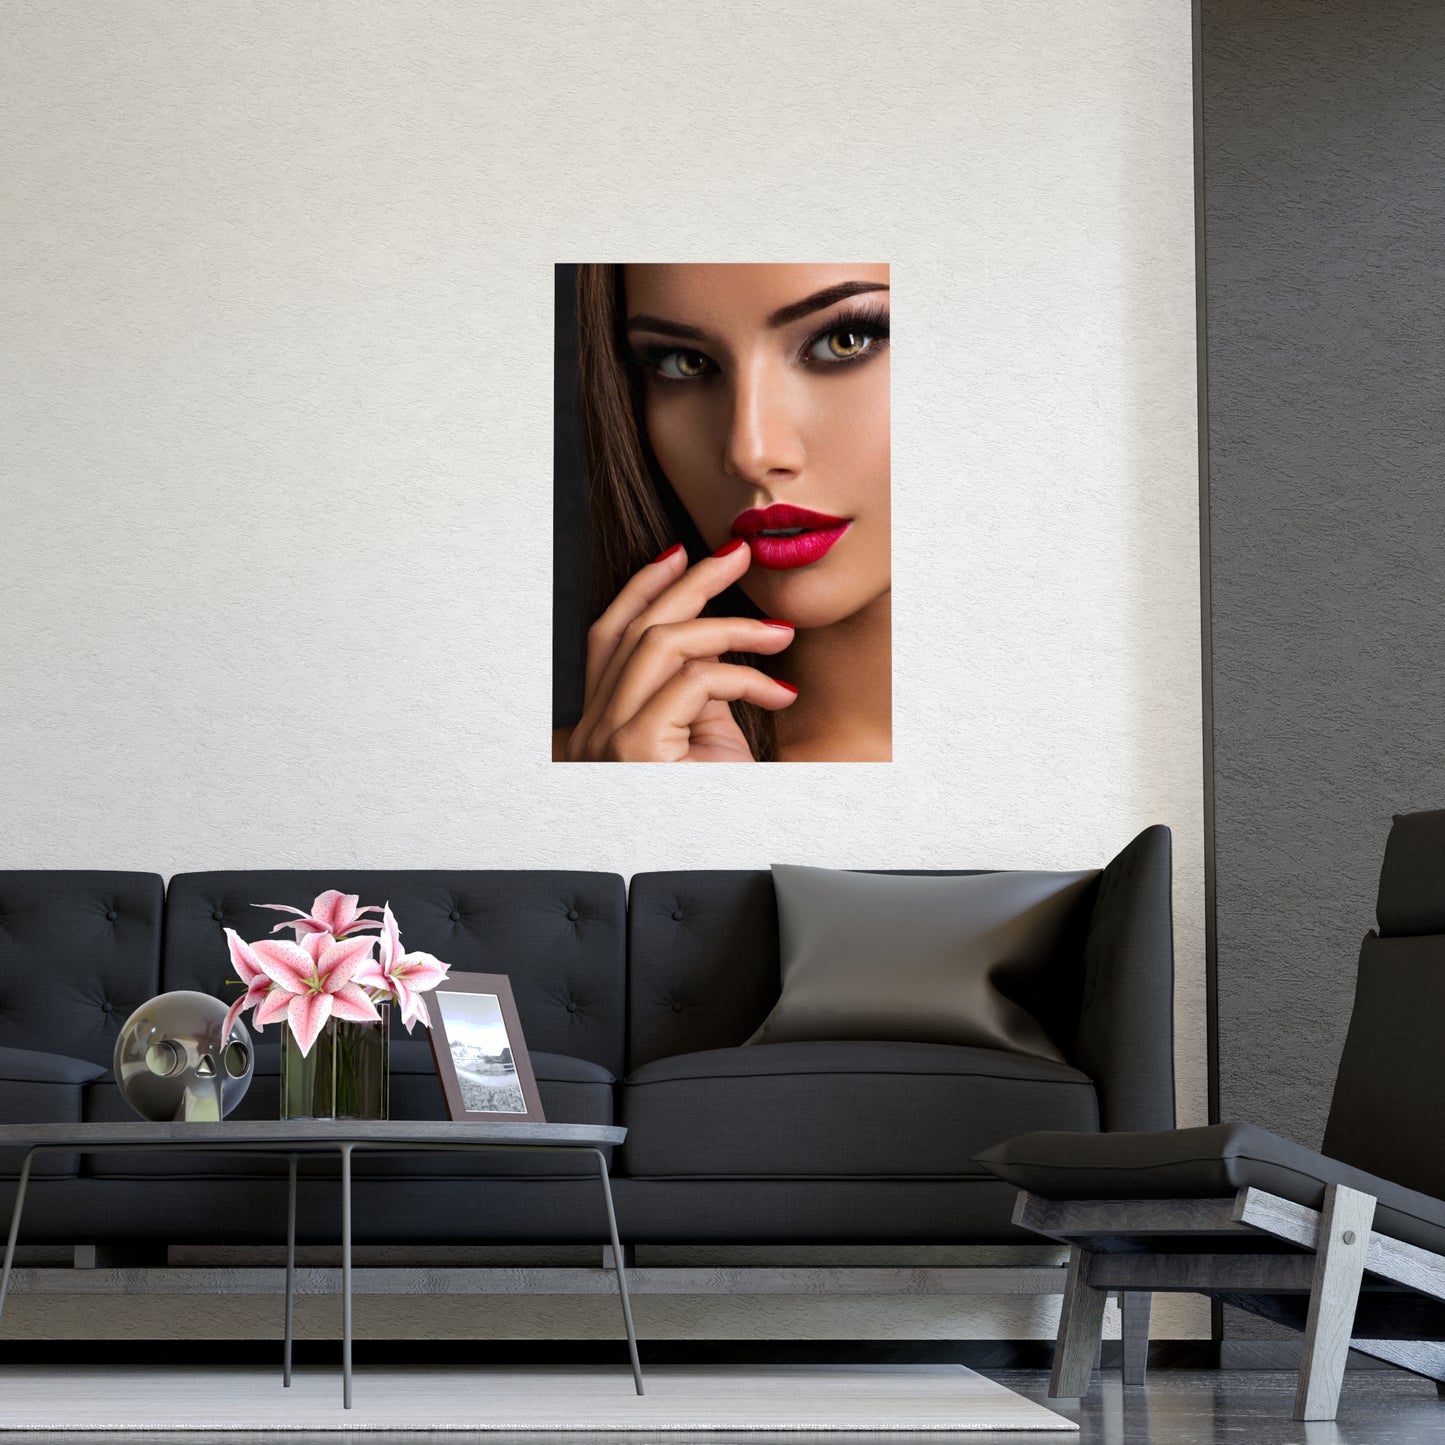 Posters - Sexy Lips - Vertical Matte Posters - 10